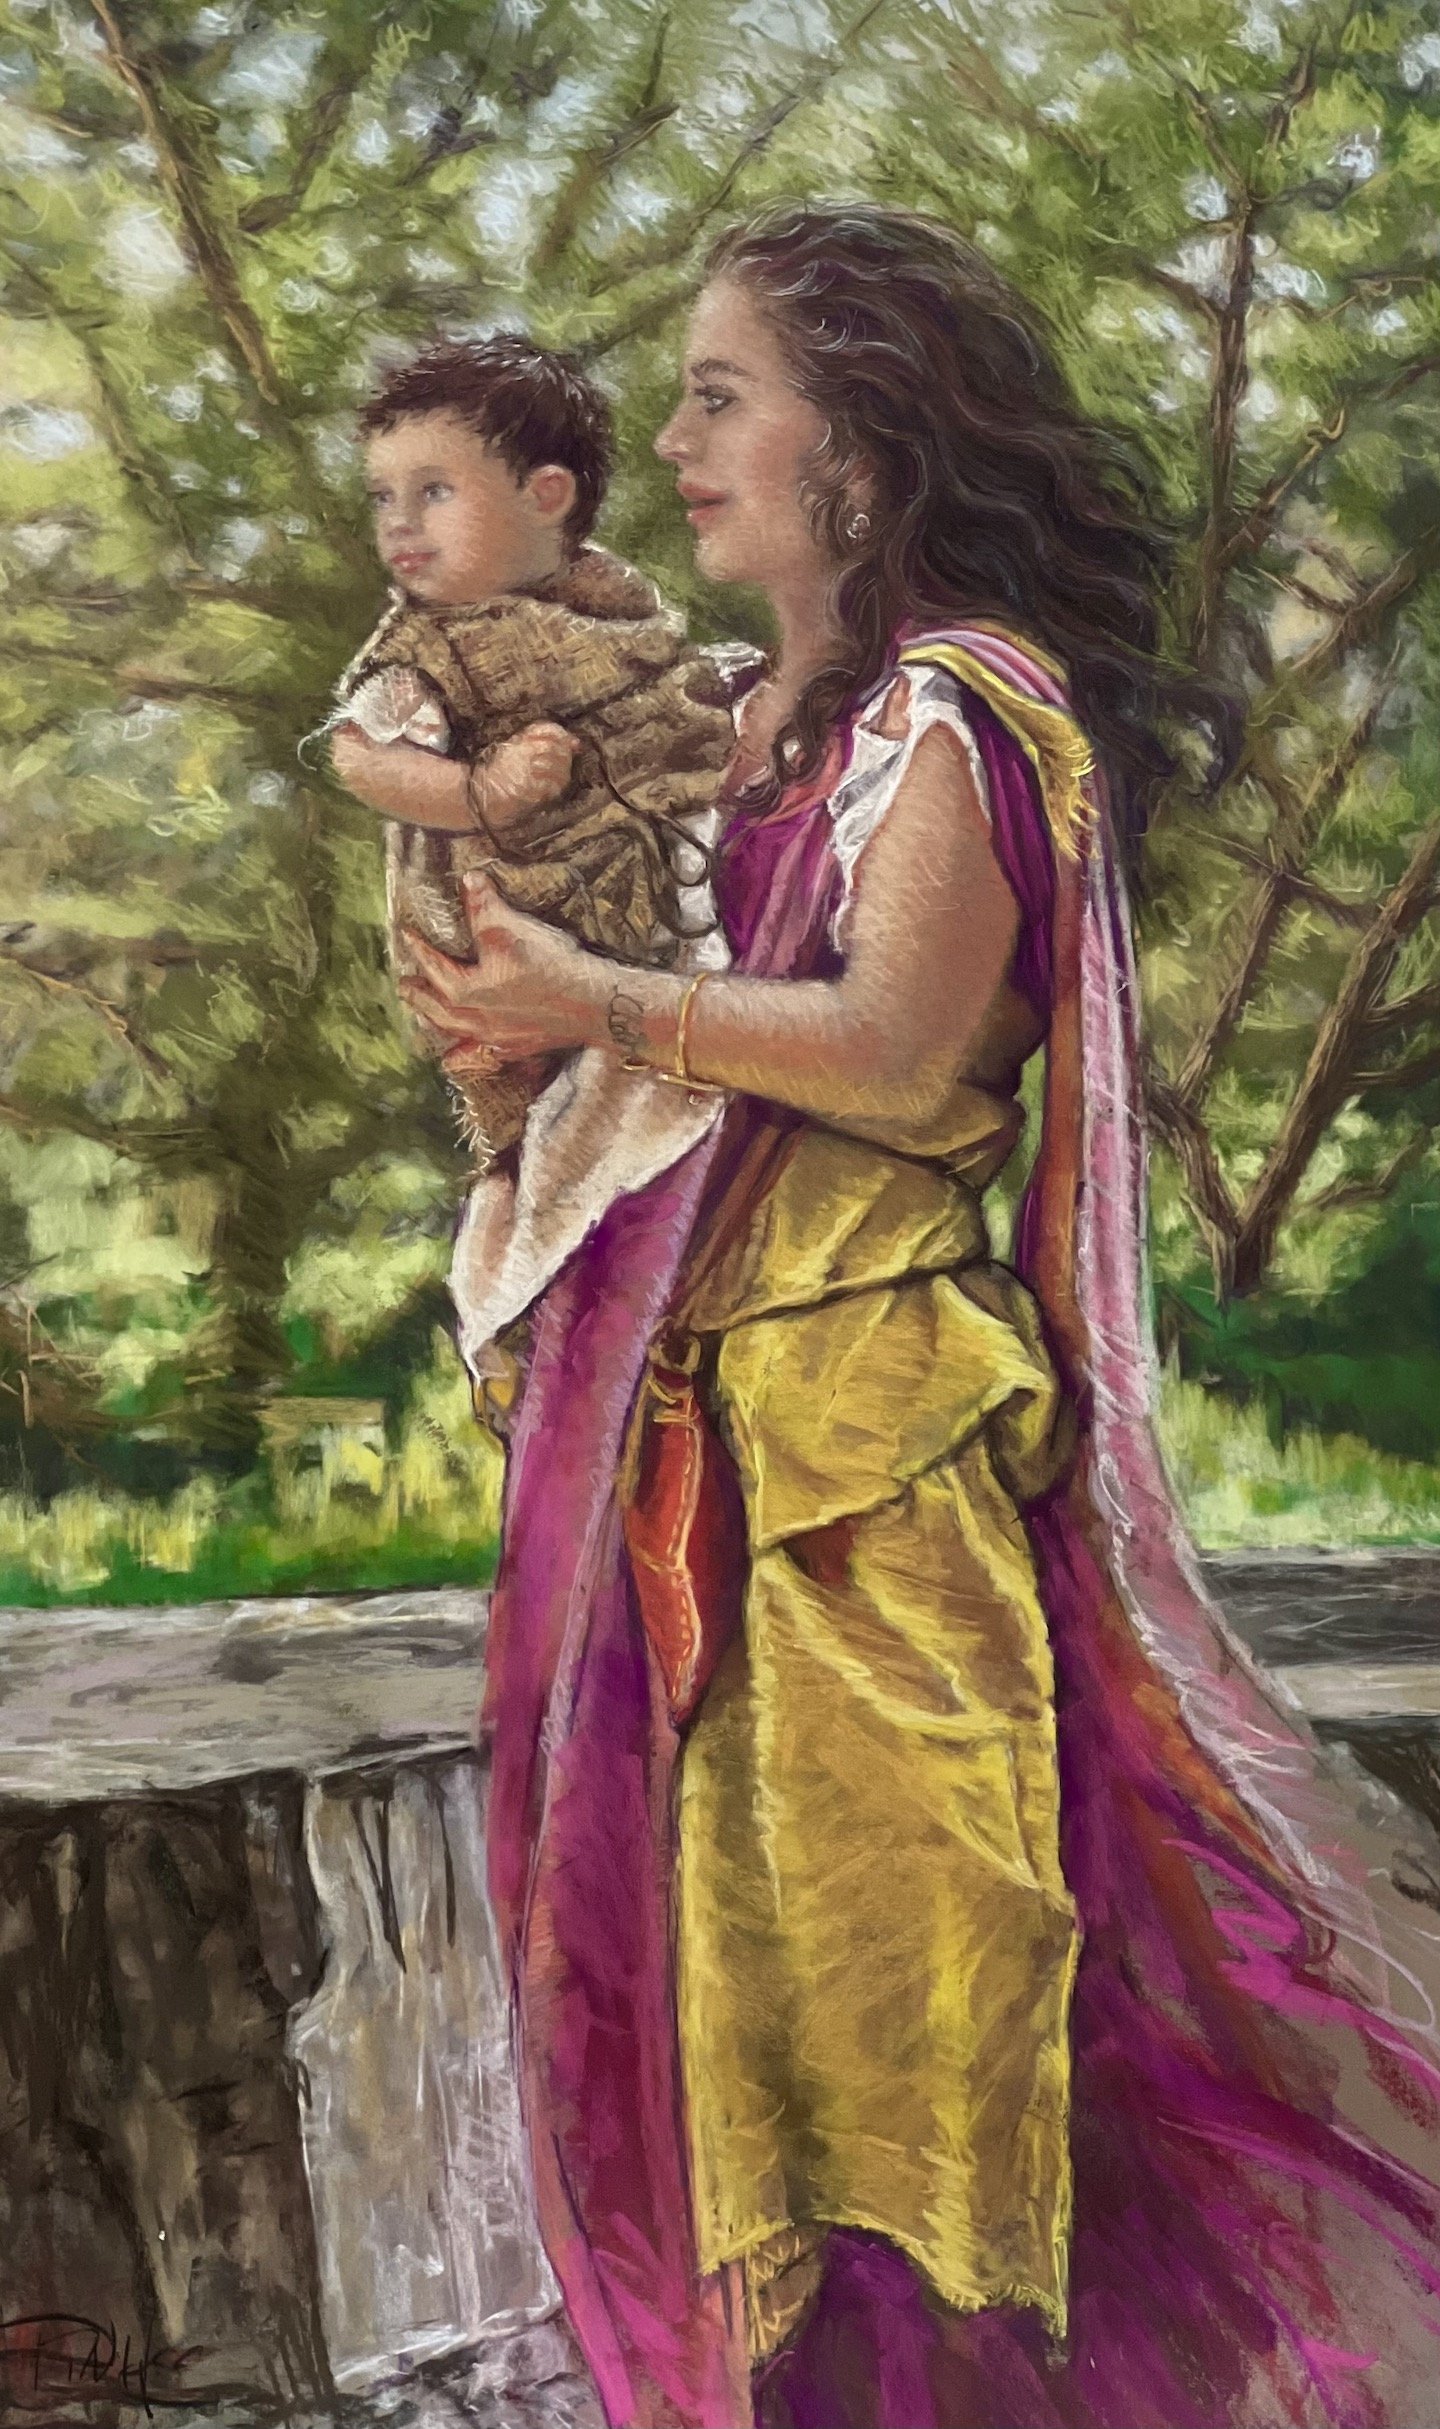    Anticipation  , 39” x 26”, pastel on sanded paper 